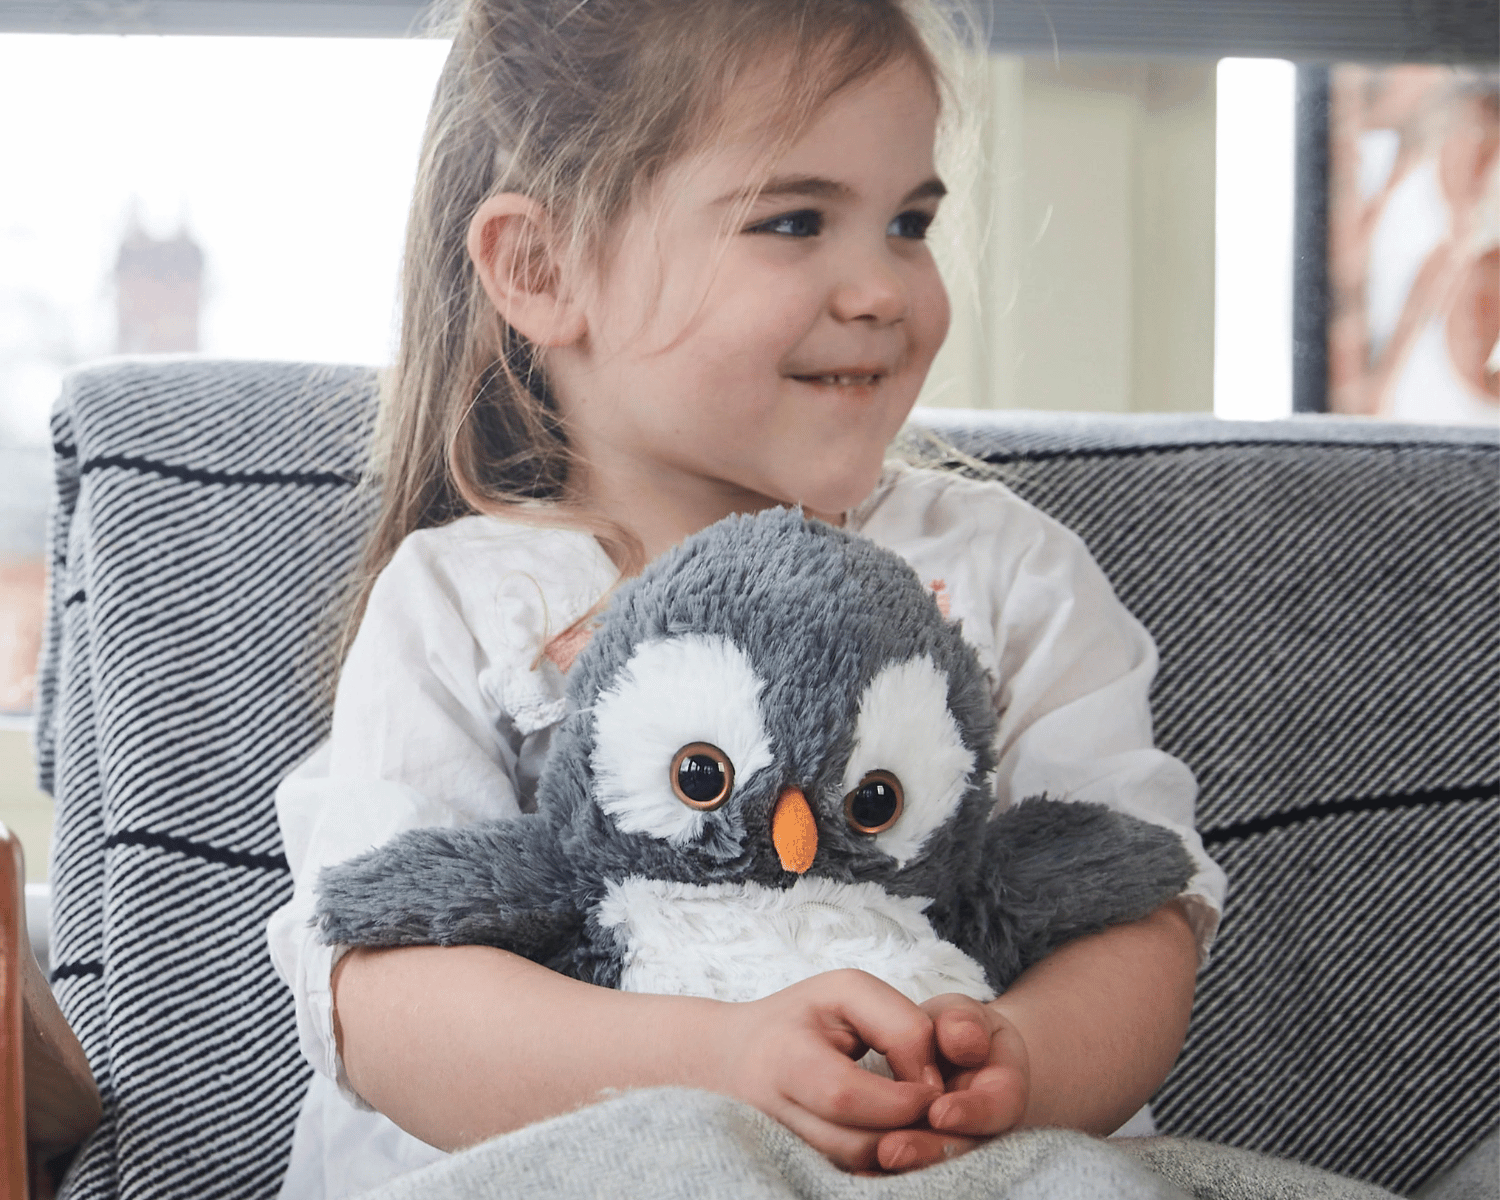 Girl holding microwave penguin toy